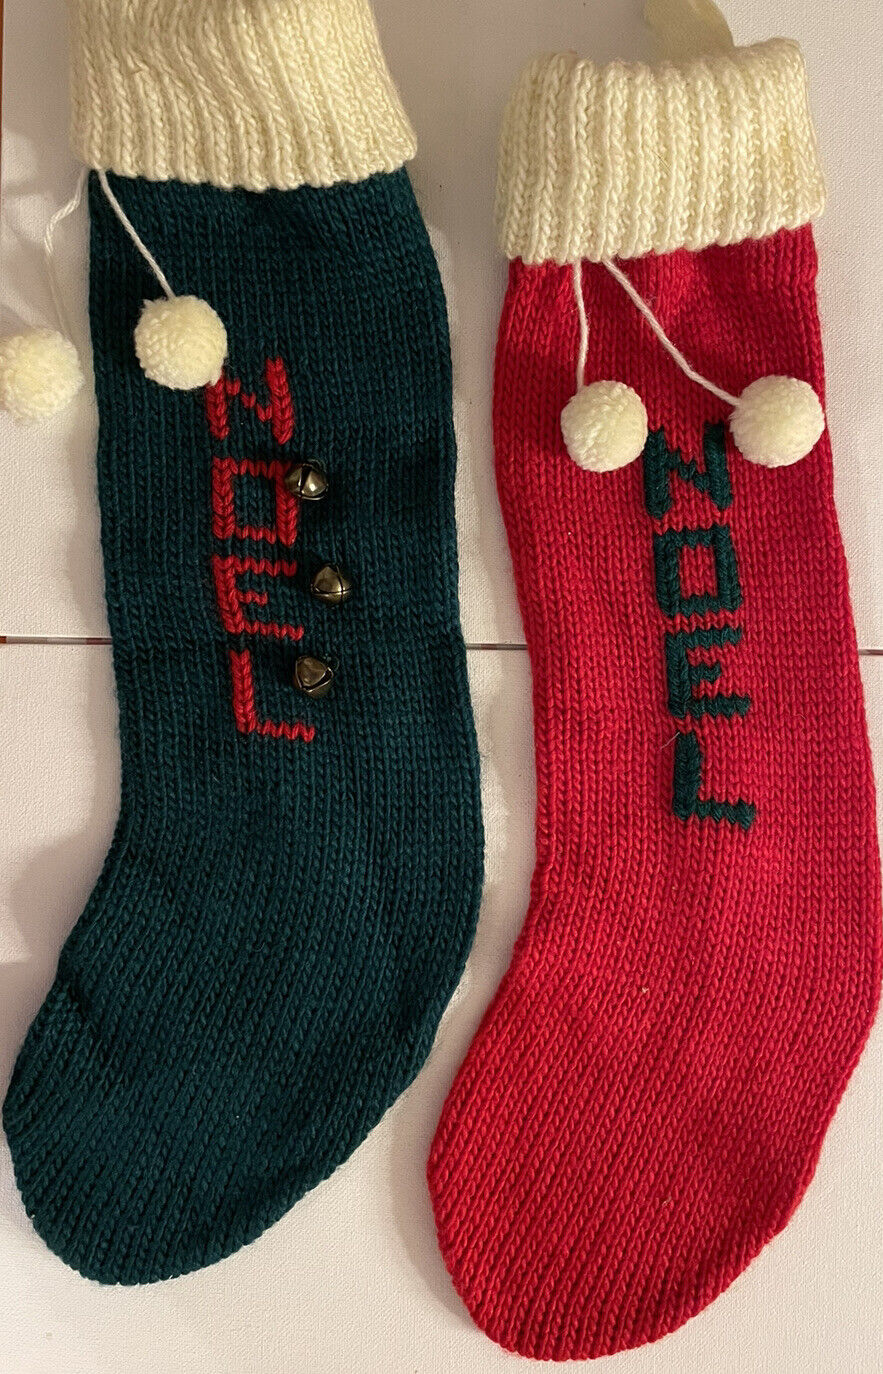 SET OF 2 Vintage 1986 DEPT 56 KNIT CHRISTMAS Stockings 18 in Red Green EUC Bells